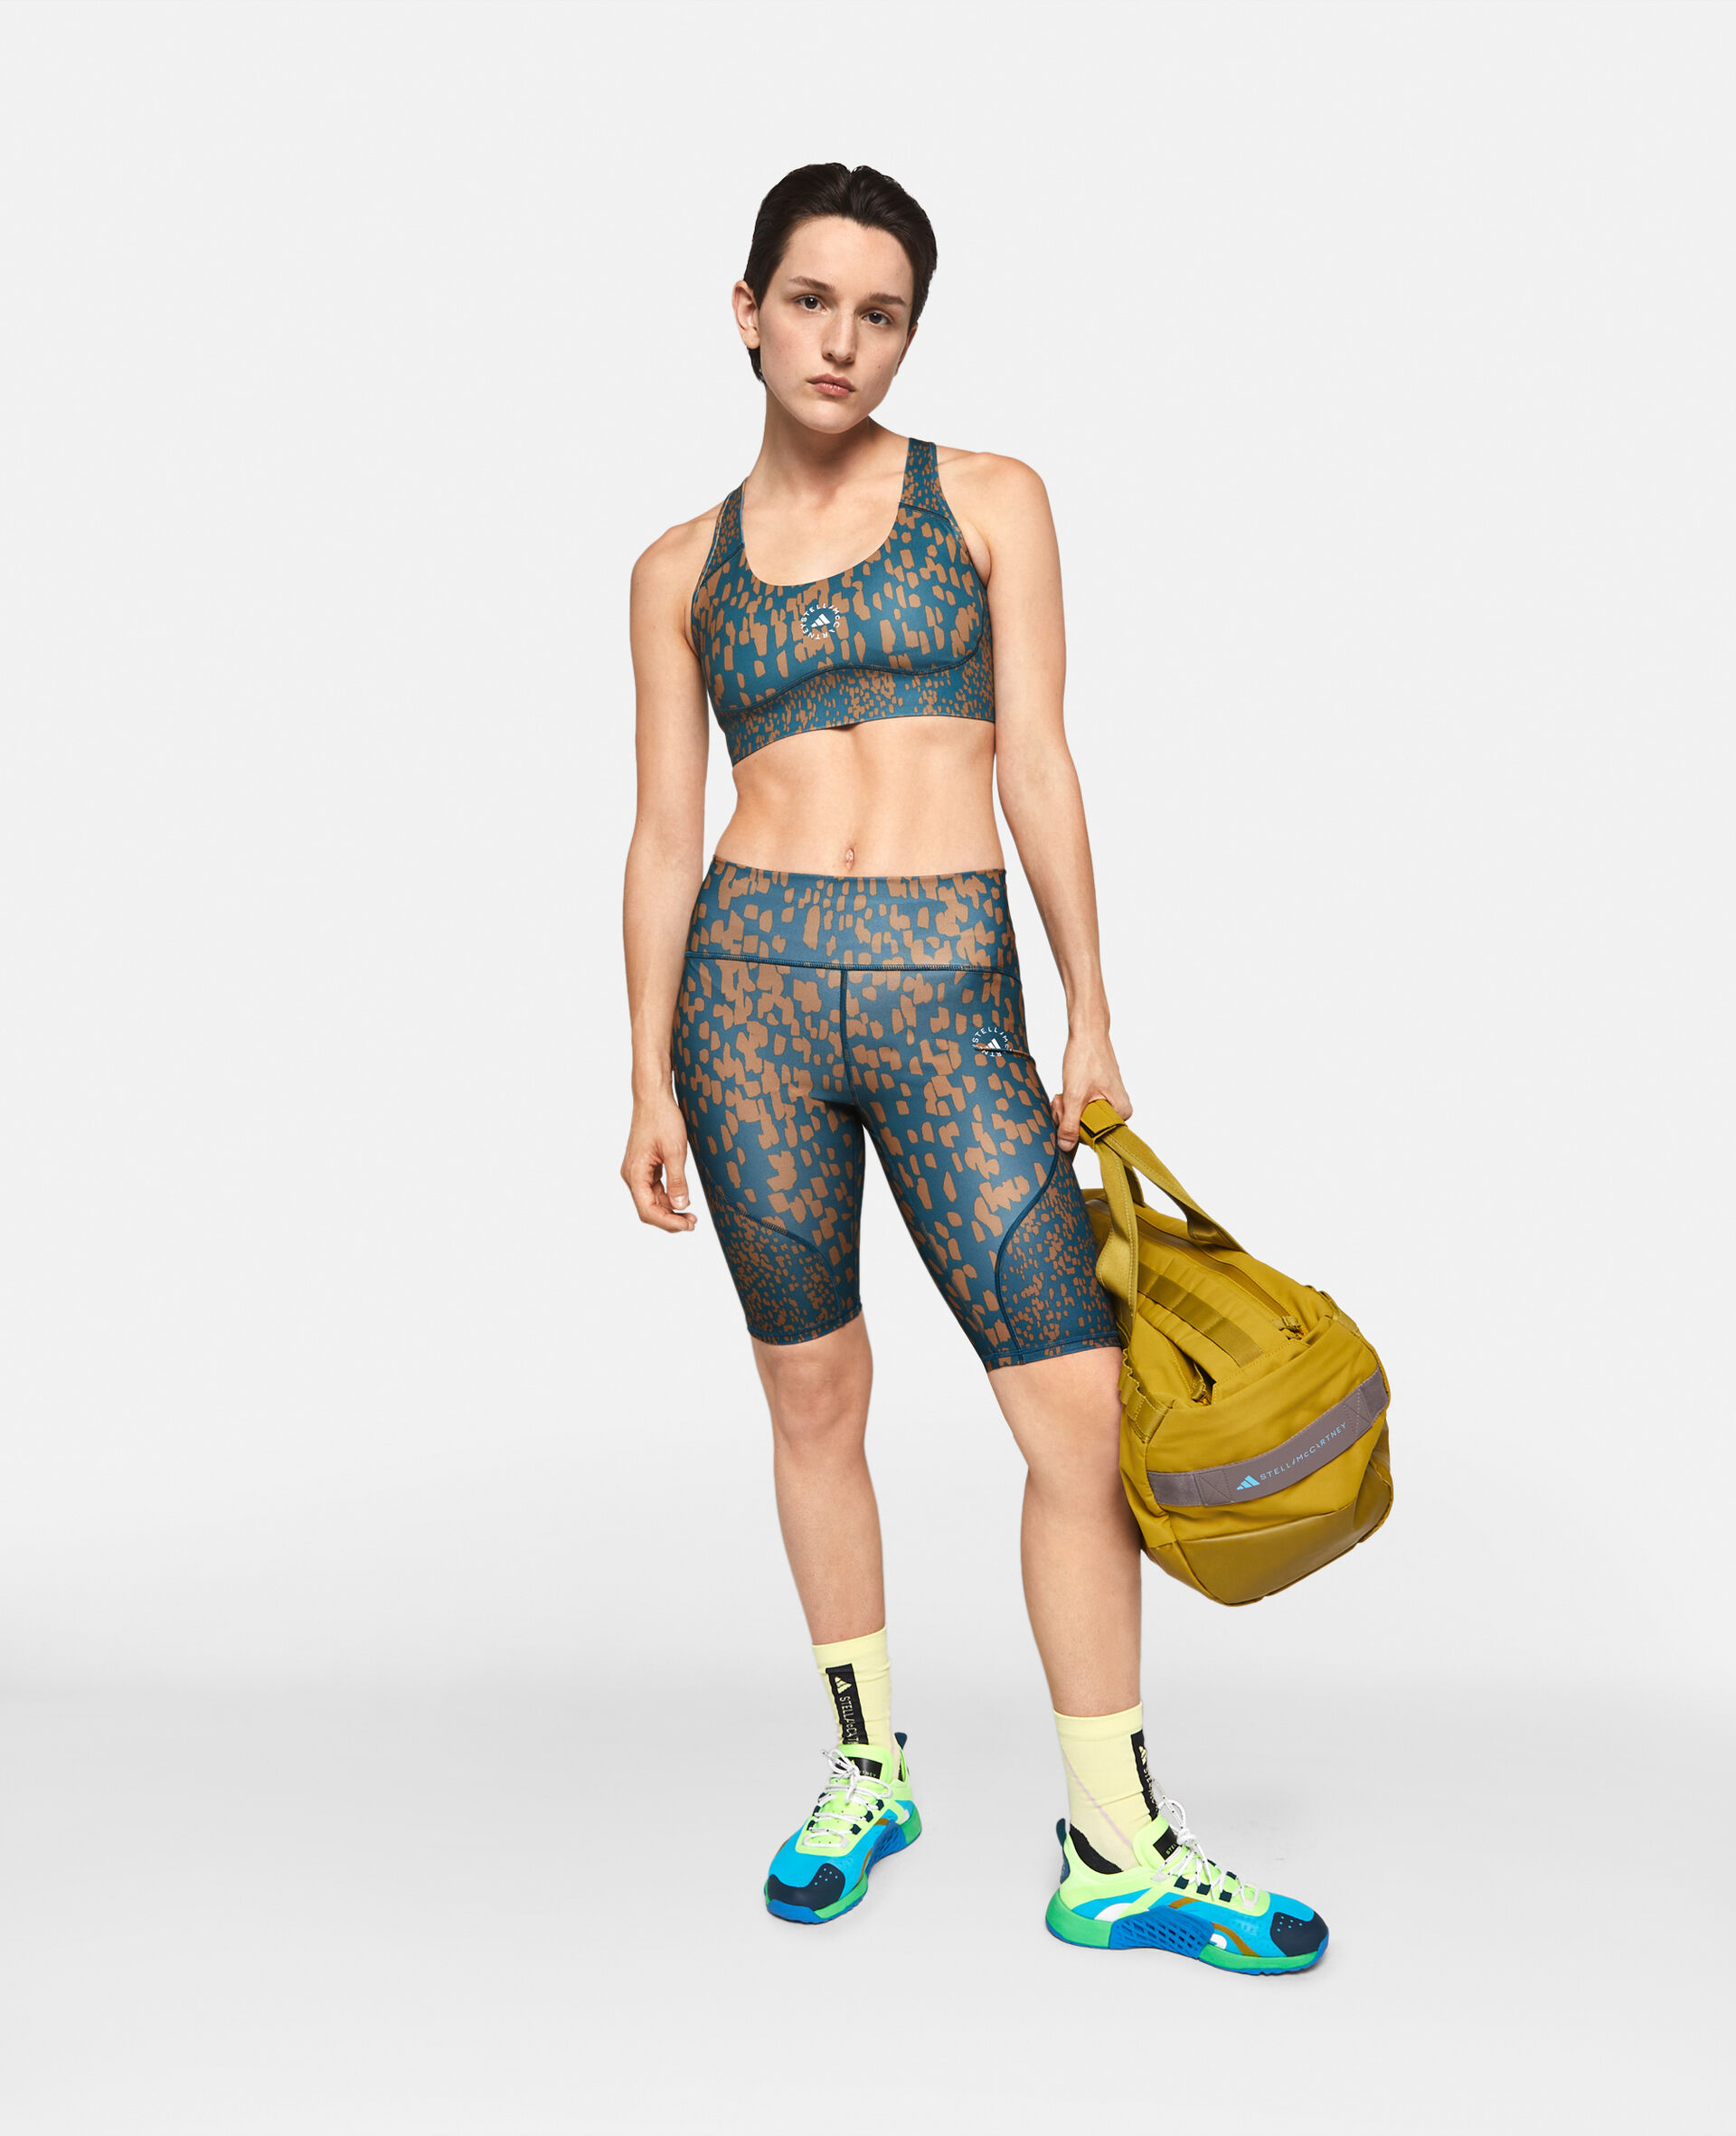 Legging sans coutures adidas by Stella McCartney TrueStrength - Turquoise  adidas, adidas France